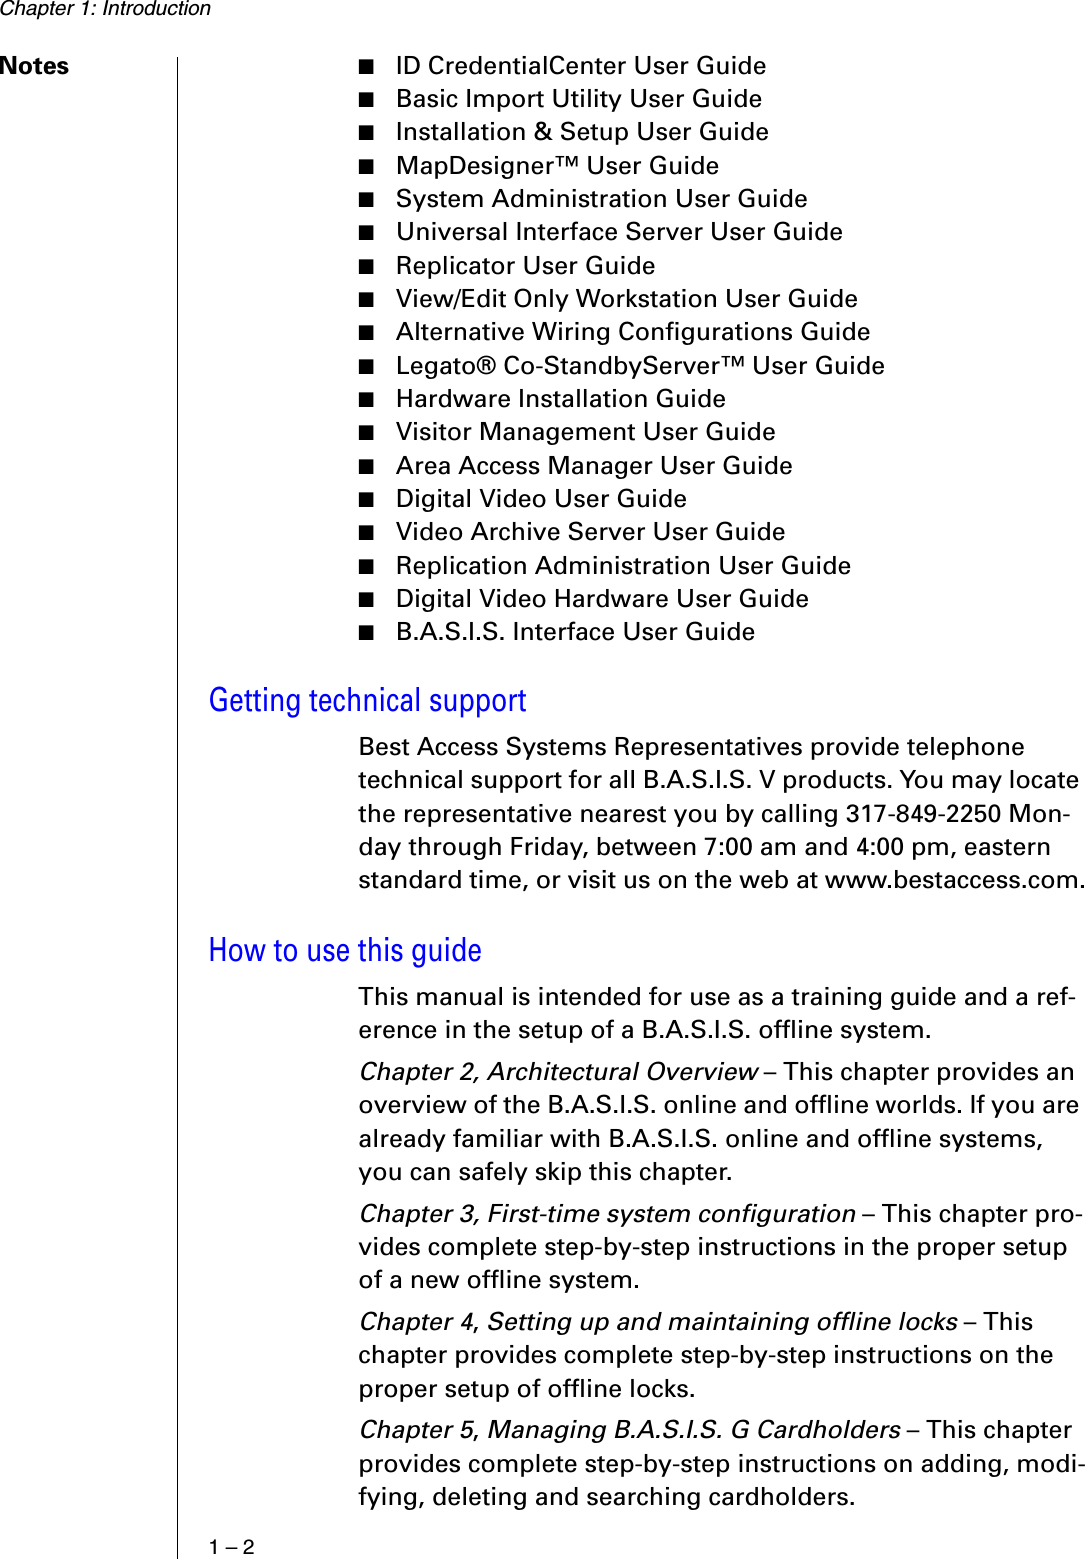 Chapter 1: Introduction1 – 2Notes ■ID CredentialCenter User Guide■Basic Import Utility User Guide■Installation &amp; Setup User Guide■MapDesigner™ User Guide■System Administration User Guide■Universal Interface Server User Guide■Replicator User Guide■View/Edit Only Workstation User Guide■Alternative Wiring Configurations Guide■Legato® Co-StandbyServer™ User Guide■Hardware Installation Guide■Visitor Management User Guide■Area Access Manager User Guide■Digital Video User Guide■Video Archive Server User Guide■Replication Administration User Guide■Digital Video Hardware User Guide■B.A.S.I.S. Interface User GuideGetting technical supportBest Access Systems Representatives provide telephone technical support for all B.A.S.I.S. V products. You may locate the representative nearest you by calling 317-849-2250 Mon-day through Friday, between 7:00 am and 4:00 pm, eastern standard time, or visit us on the web at www.bestaccess.com.How to use this guideThis manual is intended for use as a training guide and a ref-erence in the setup of a B.A.S.I.S. offline system. Chapter 2, Architectural Overview – This chapter provides an overview of the B.A.S.I.S. online and offline worlds. If you are already familiar with B.A.S.I.S. online and offline systems, you can safely skip this chapter. Chapter 3, First-time system configuration – This chapter pro-vides complete step-by-step instructions in the proper setup of a new offline system.Chapter 4, Setting up and maintaining offline locks – This chapter provides complete step-by-step instructions on the proper setup of offline locks.Chapter 5, Managing B.A.S.I.S. G Cardholders – This chapter provides complete step-by-step instructions on adding, modi-fying, deleting and searching cardholders.